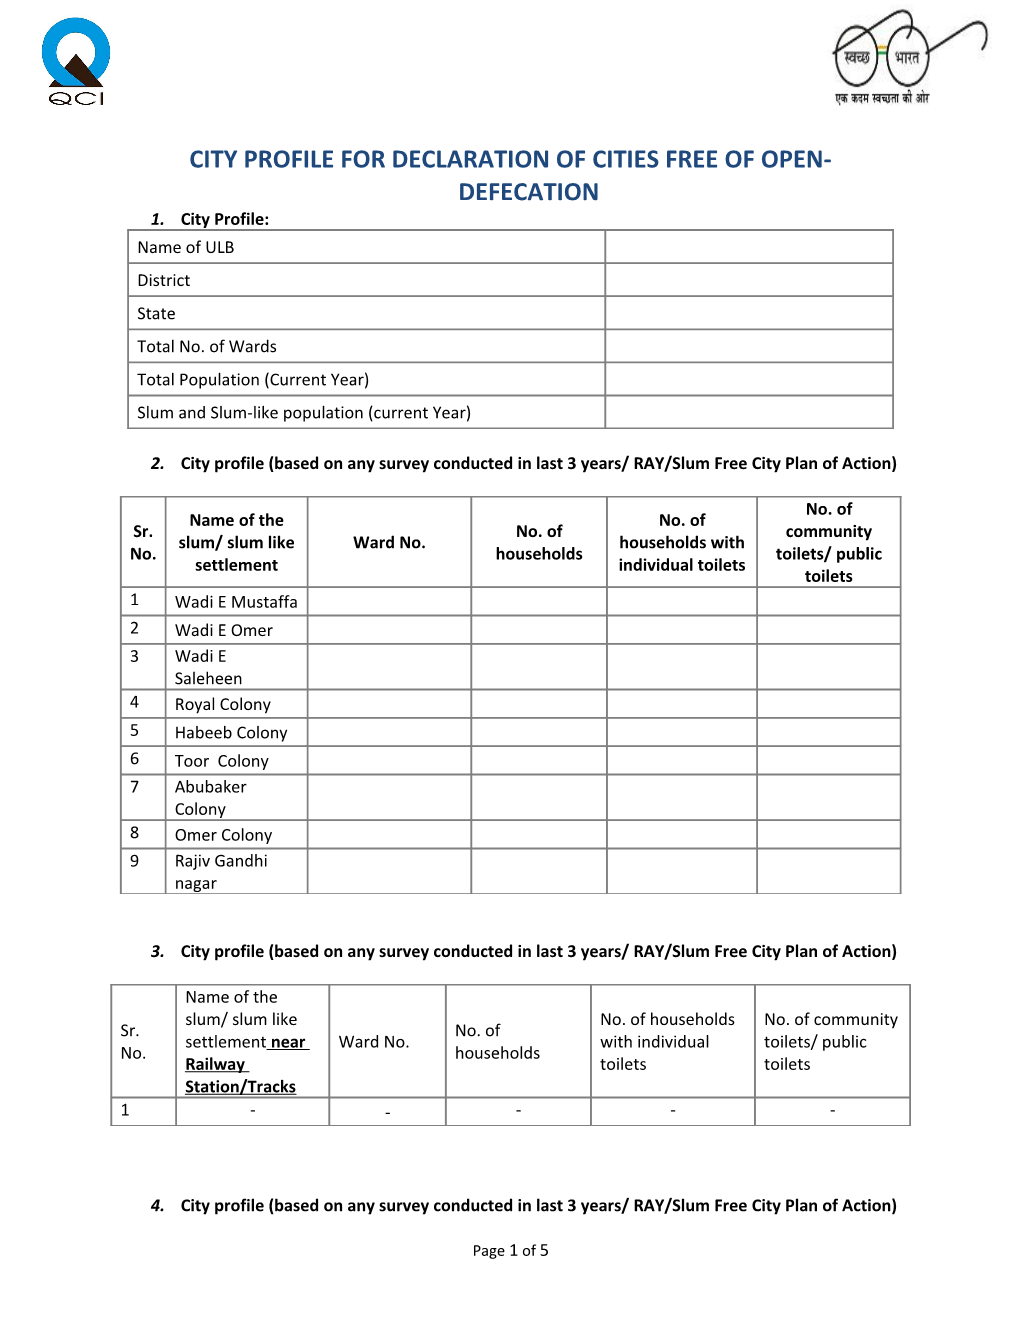 City Profile for Declaration of Cities Free of Open-Defecation